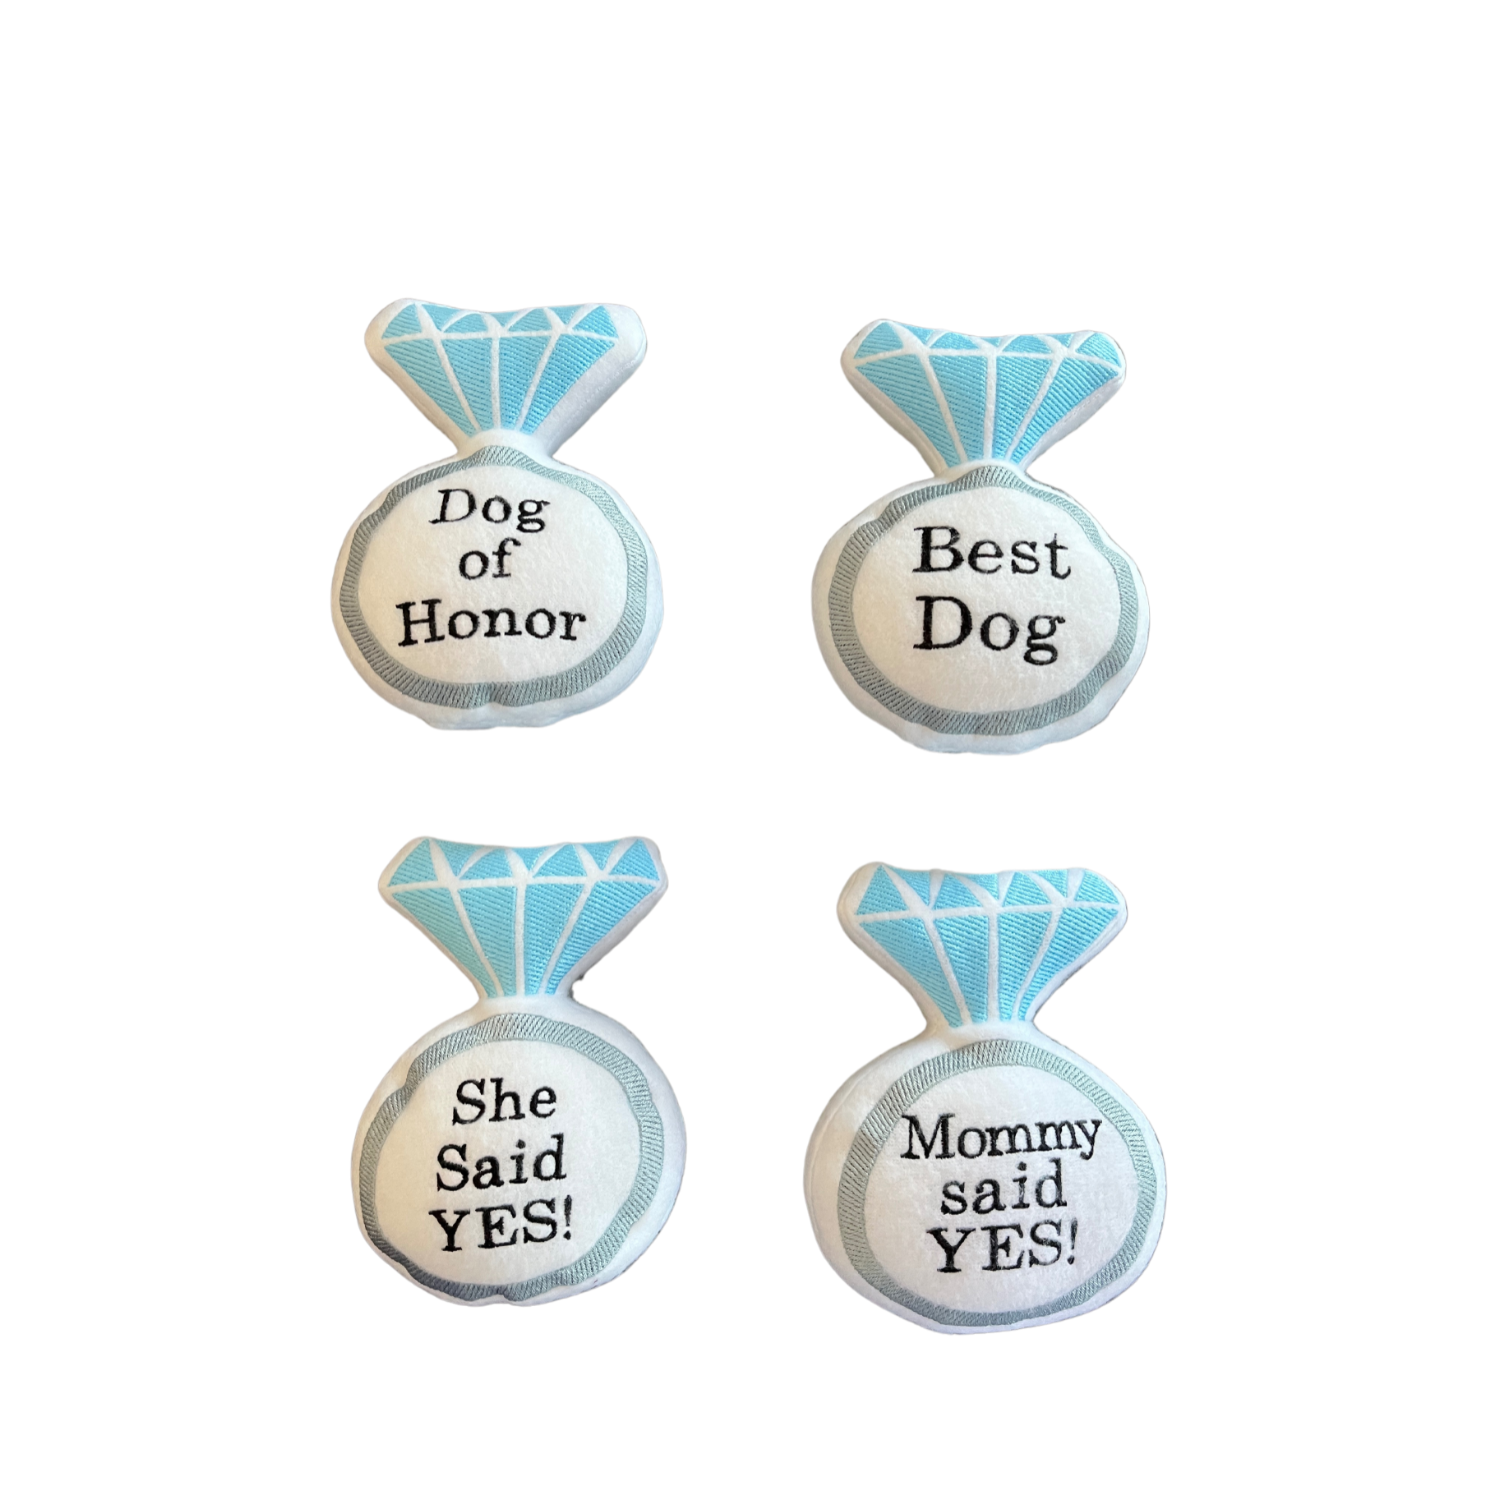 Engagement Ring Custom Dog Toy- Wedding Proposal Personalized Squeaky Toy